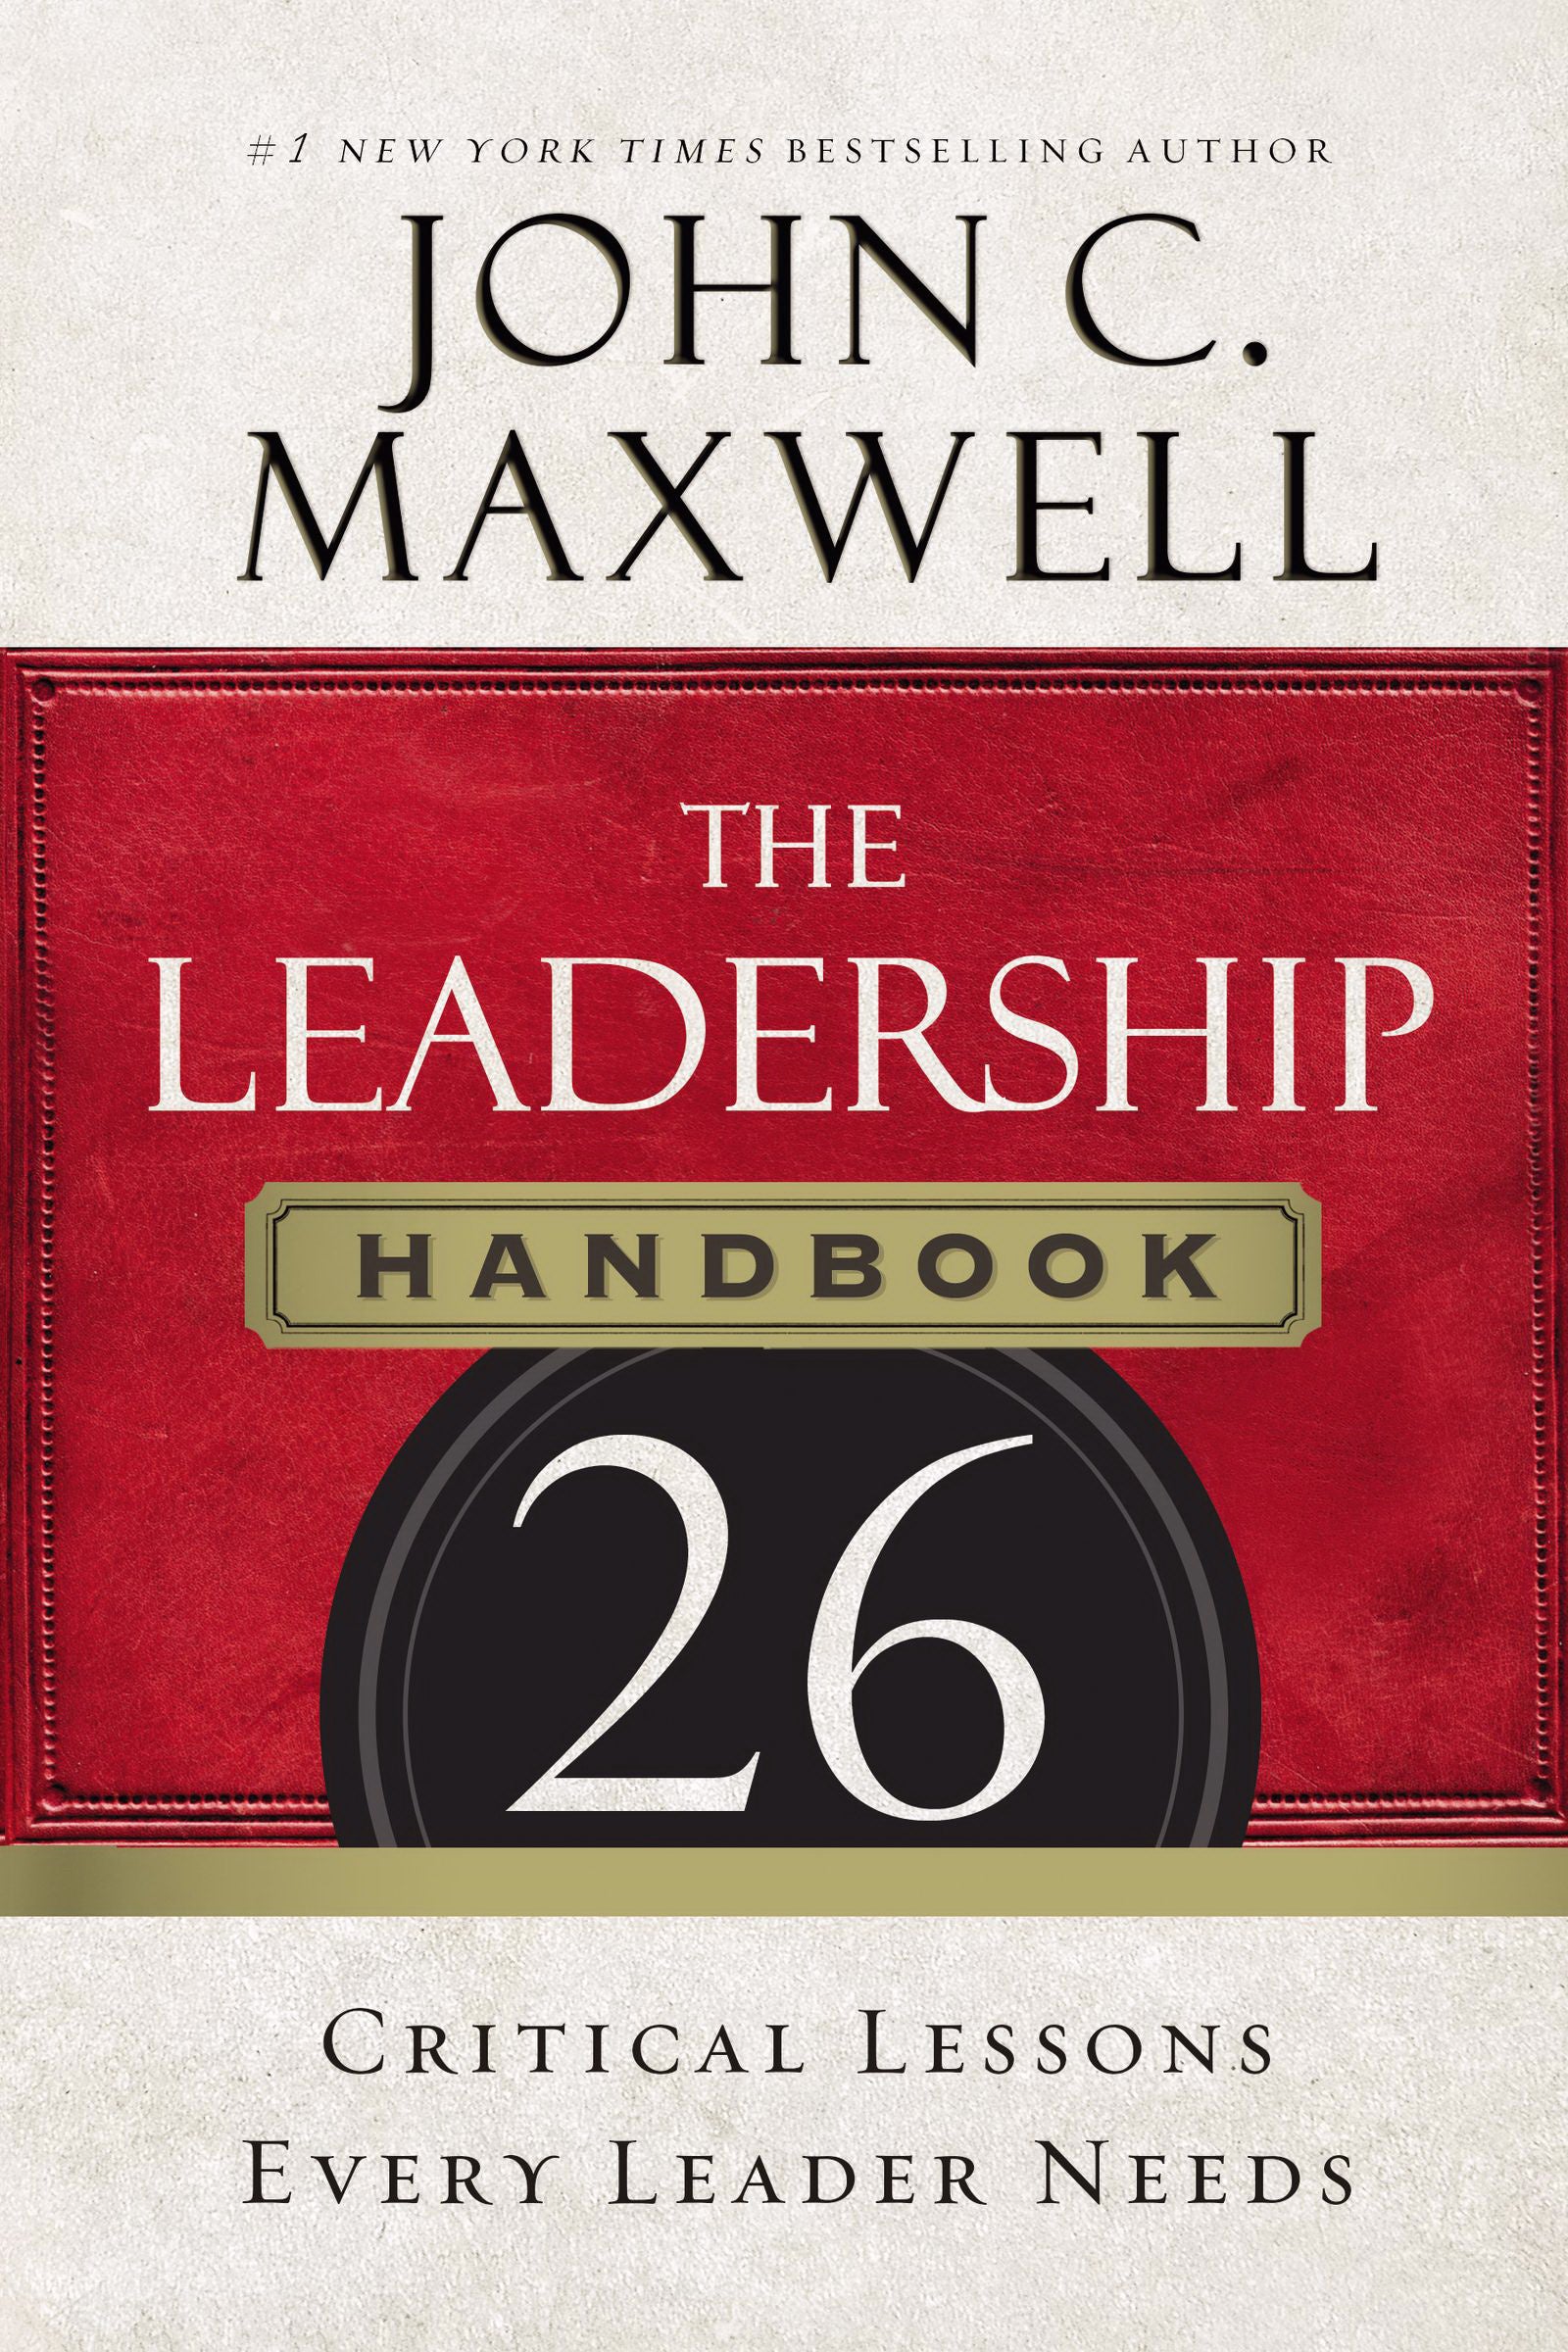 Image of The Leadership Handbook other